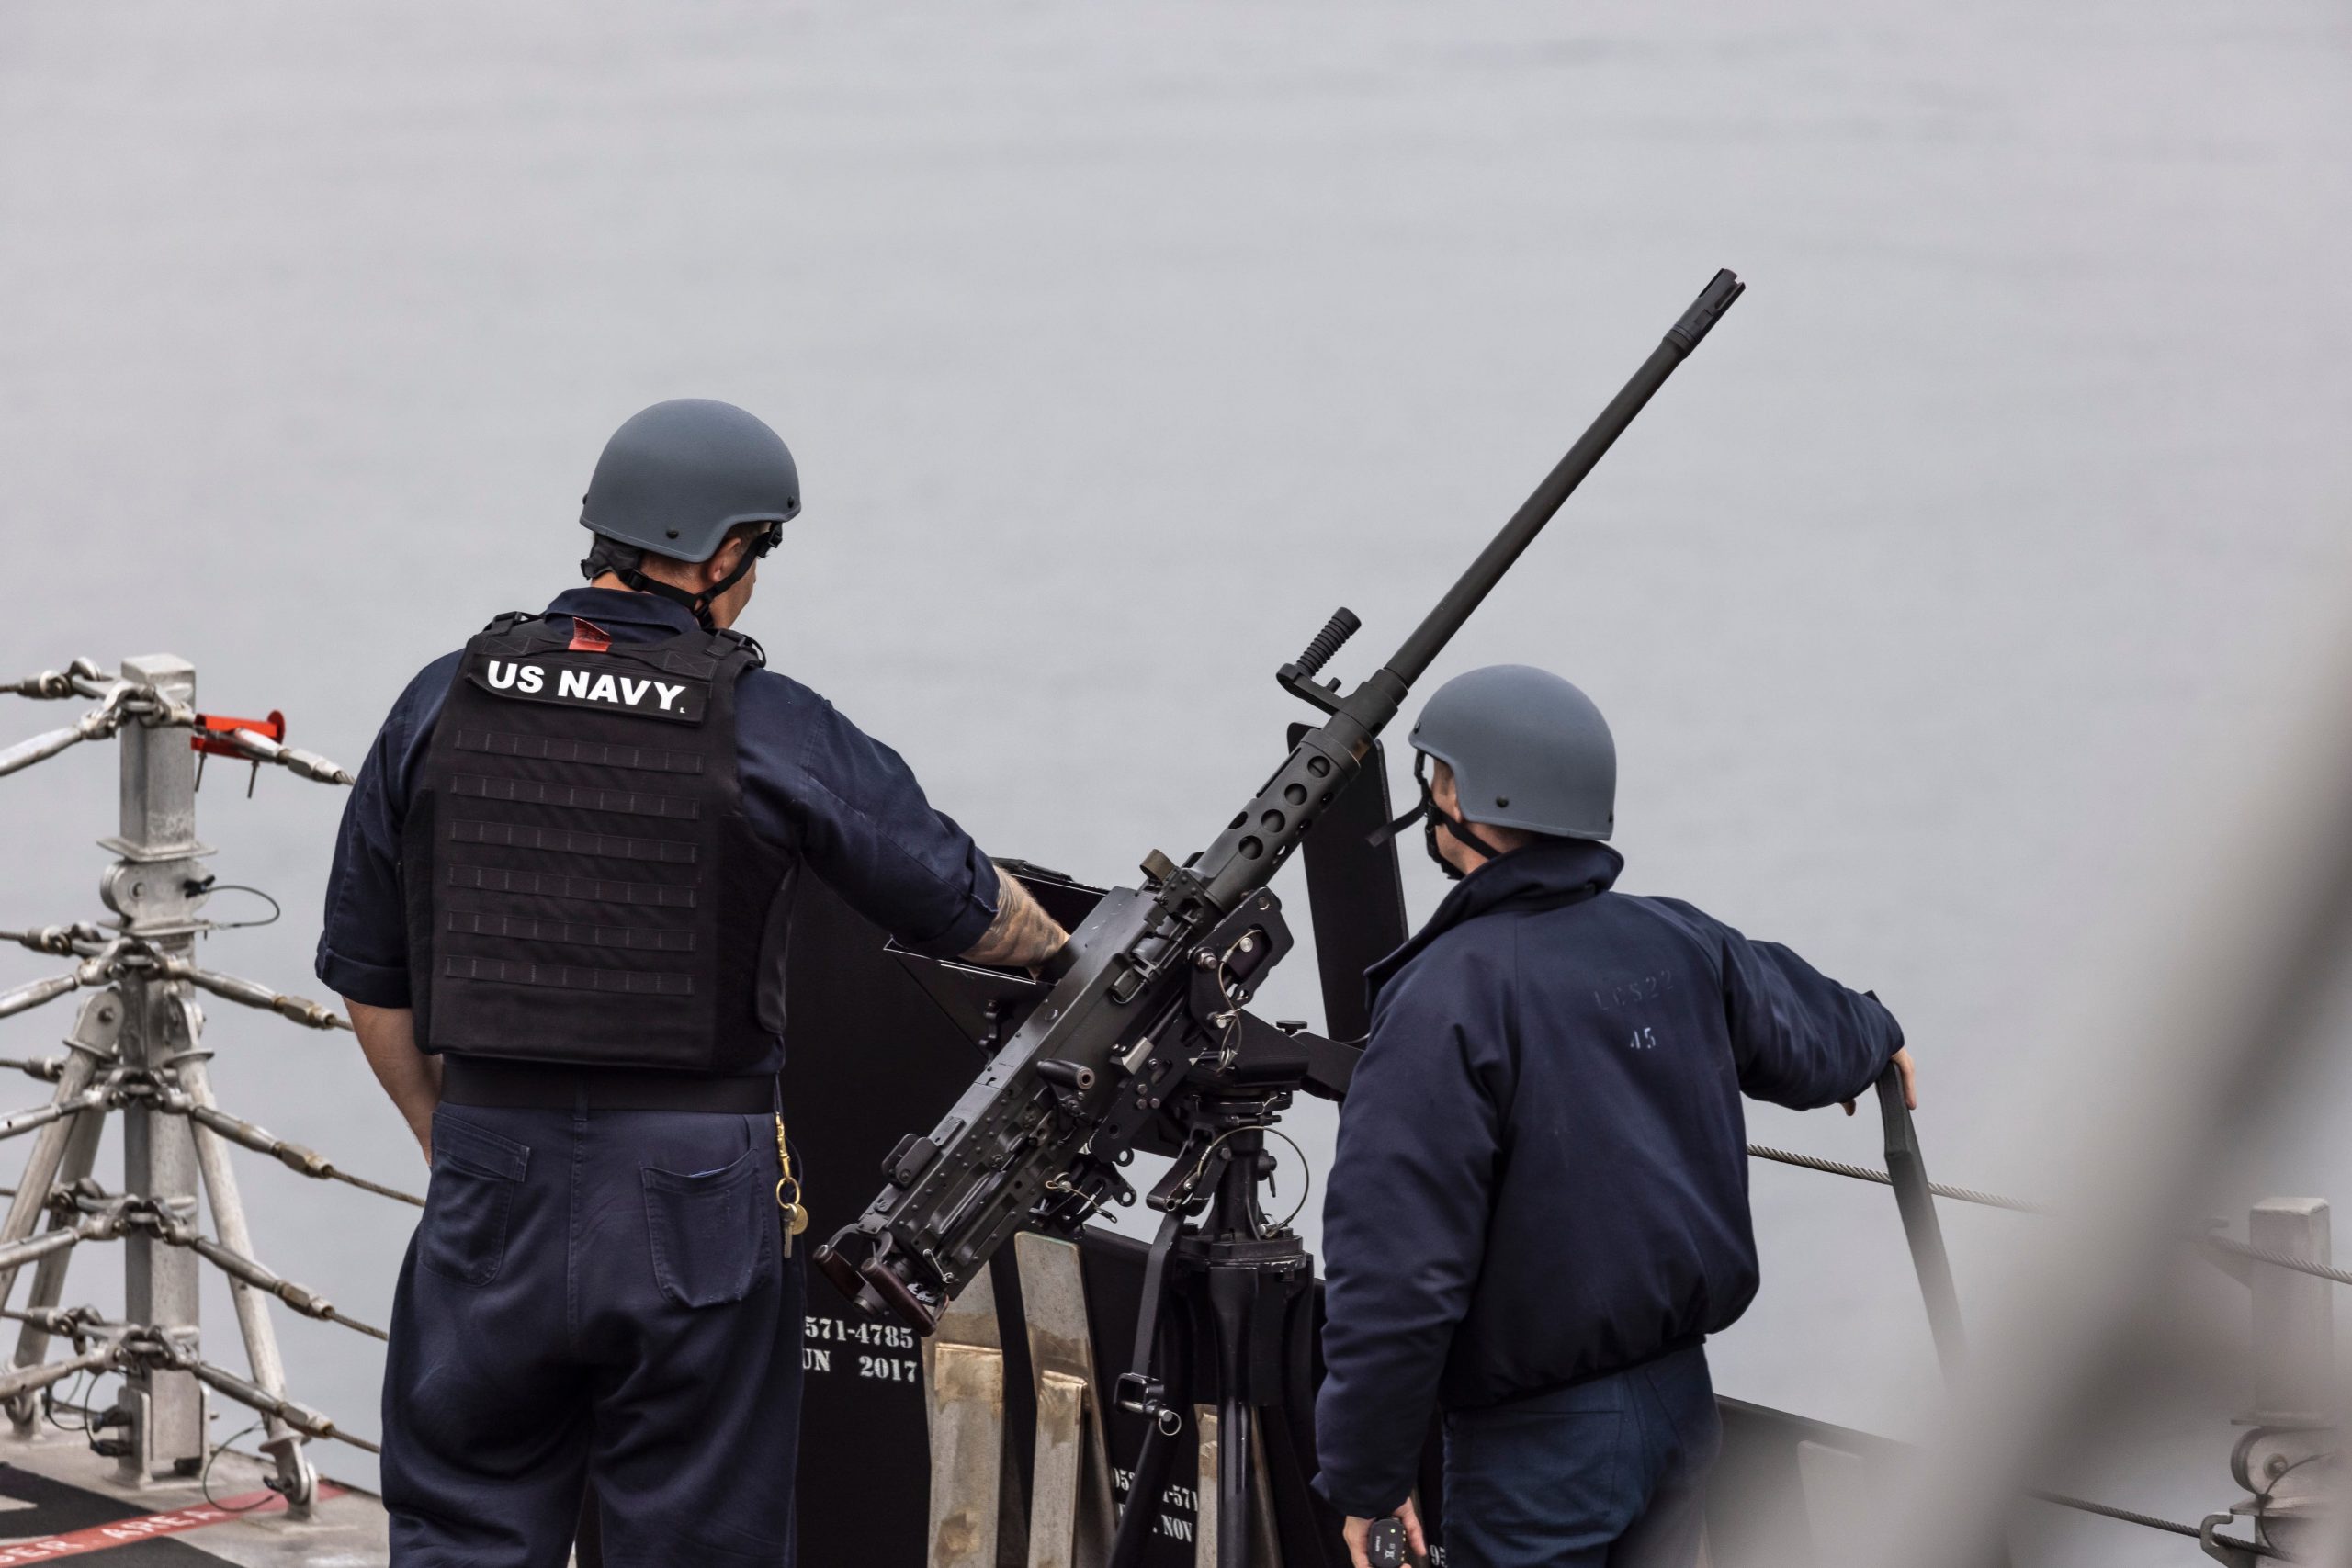 Crew members are seen manning the gun.